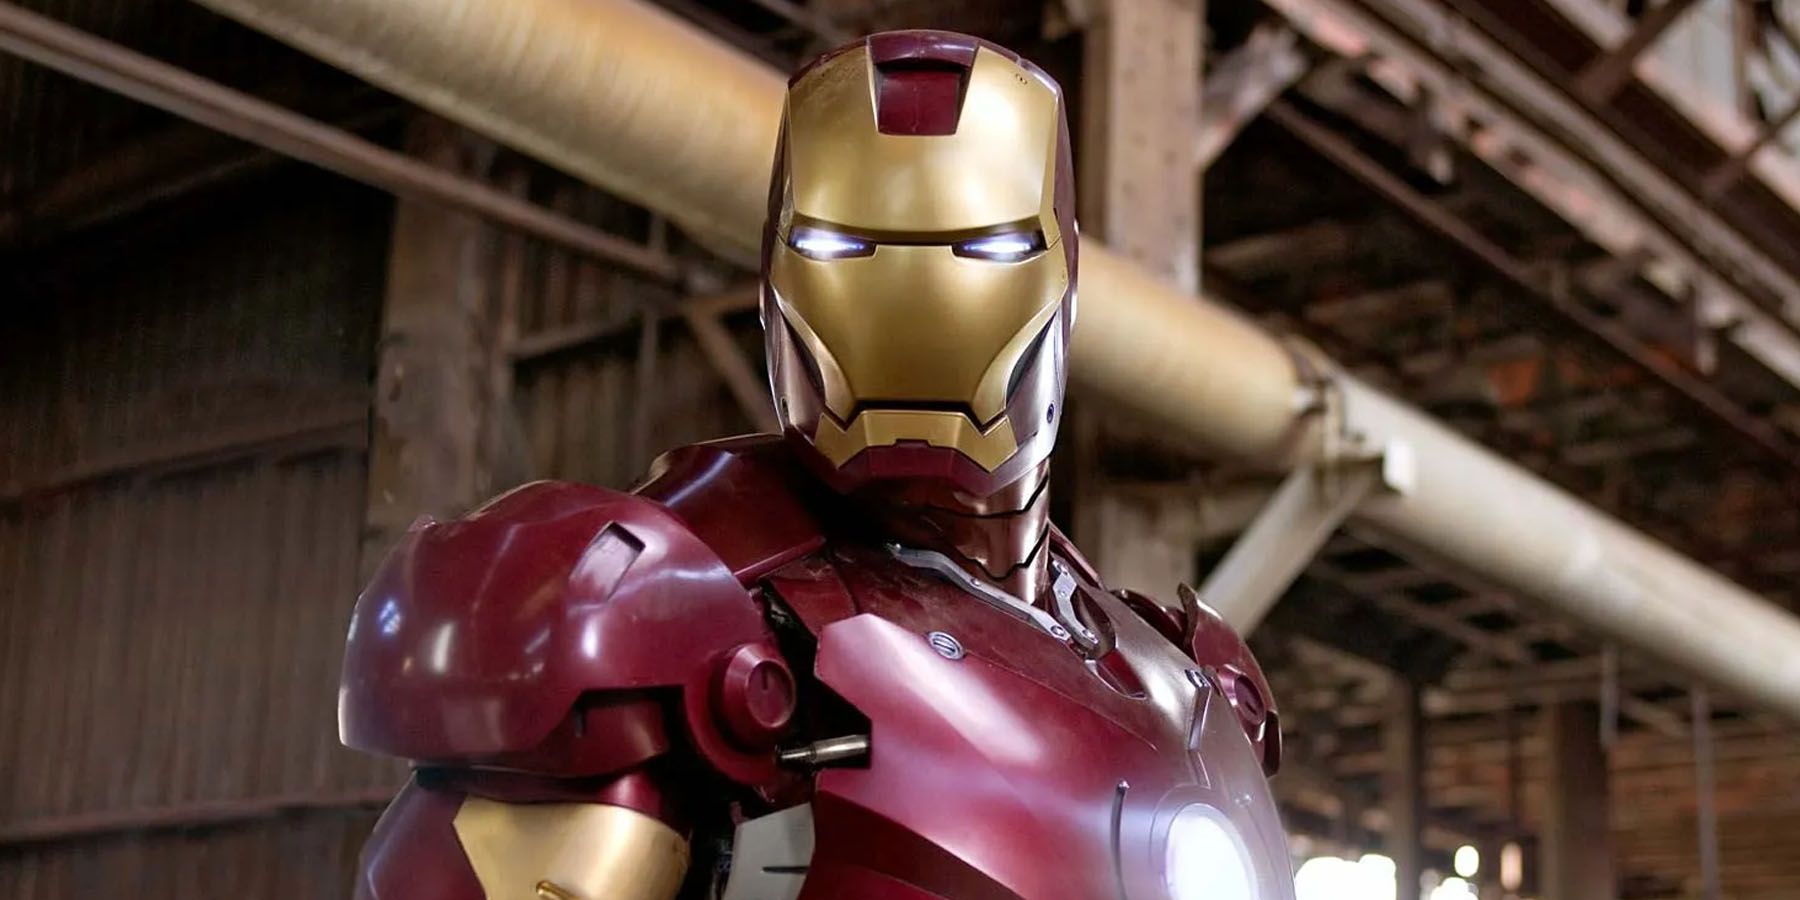 An image of Iron Man in his Mark 3 armor in the first Iron Man movie.